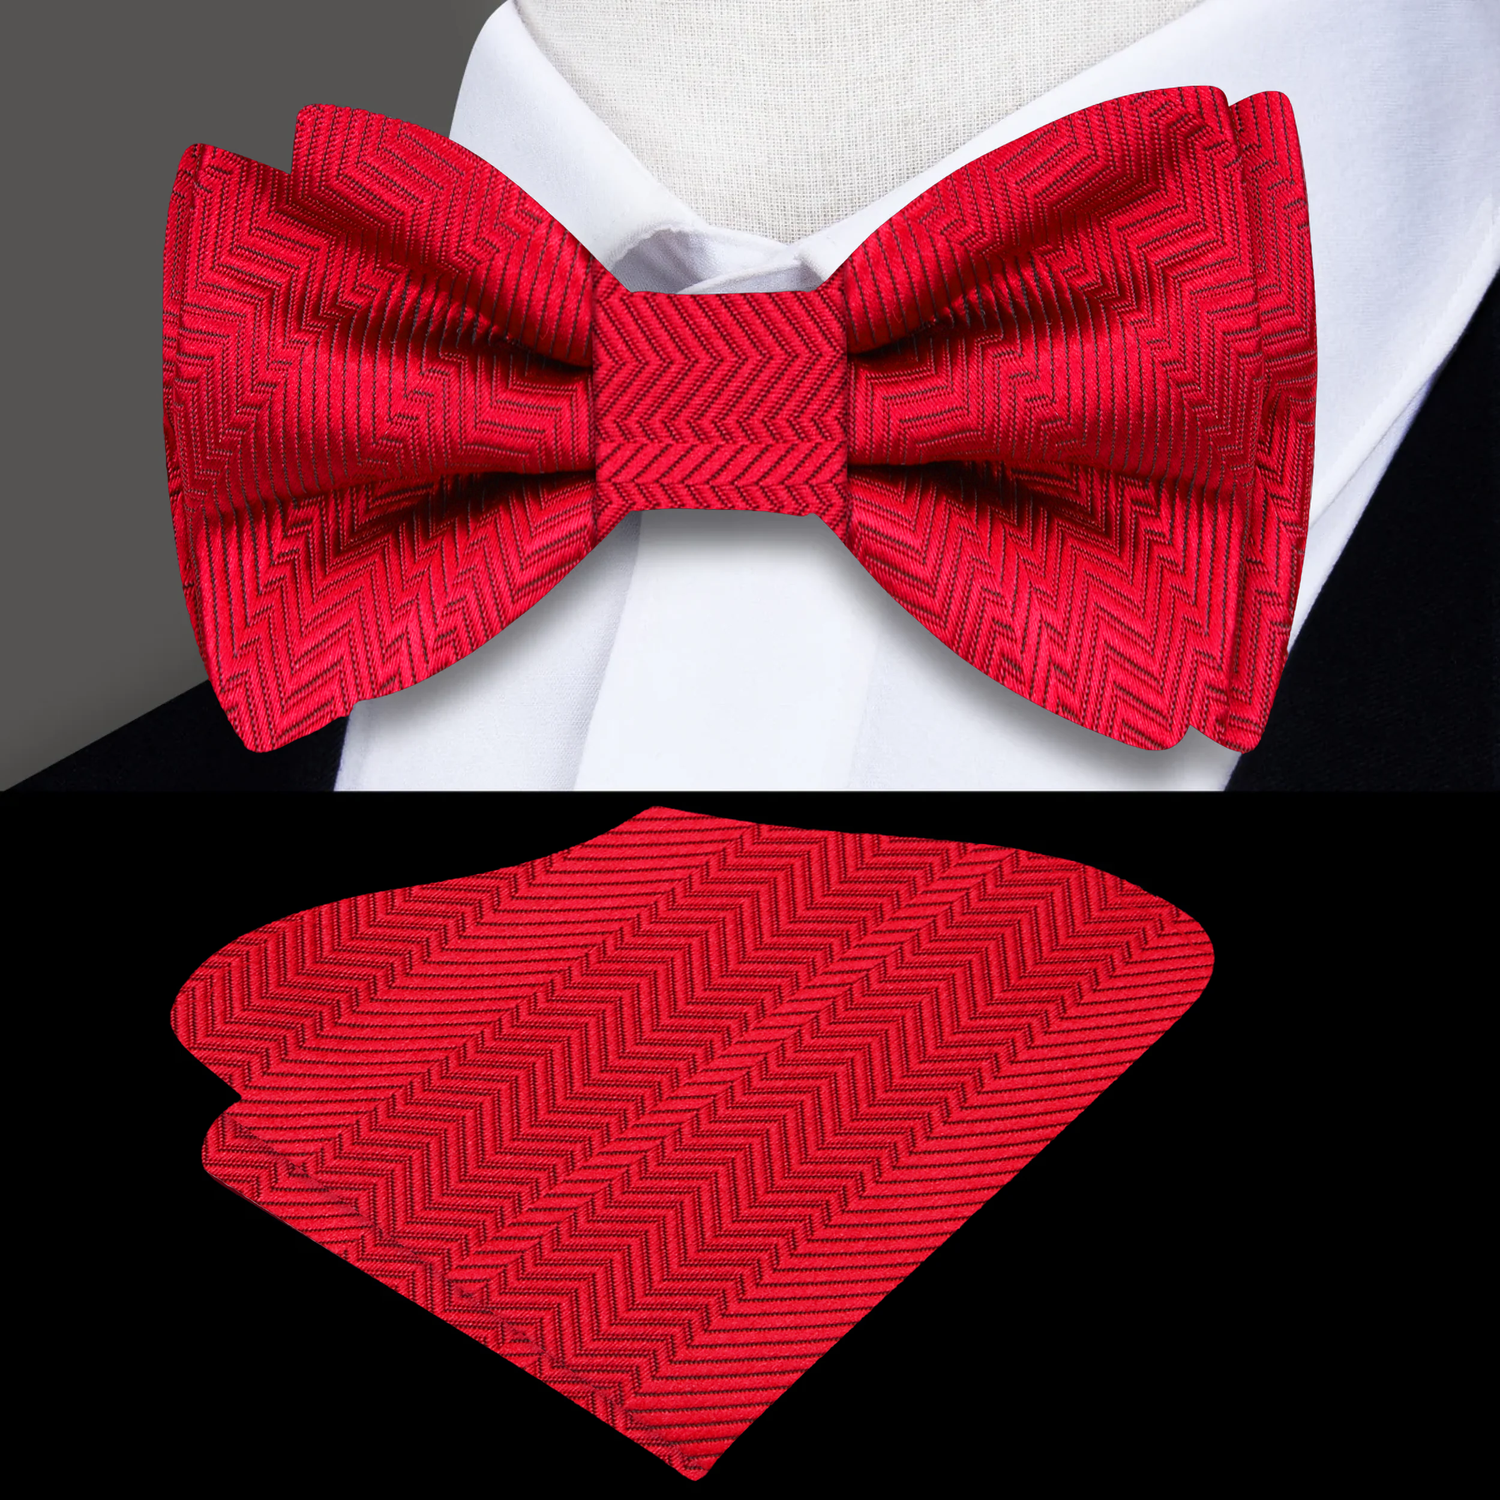 Main: A Real Red Solid Pattern Self Tie Bow Tie, Matching Pocket Square||Real Red